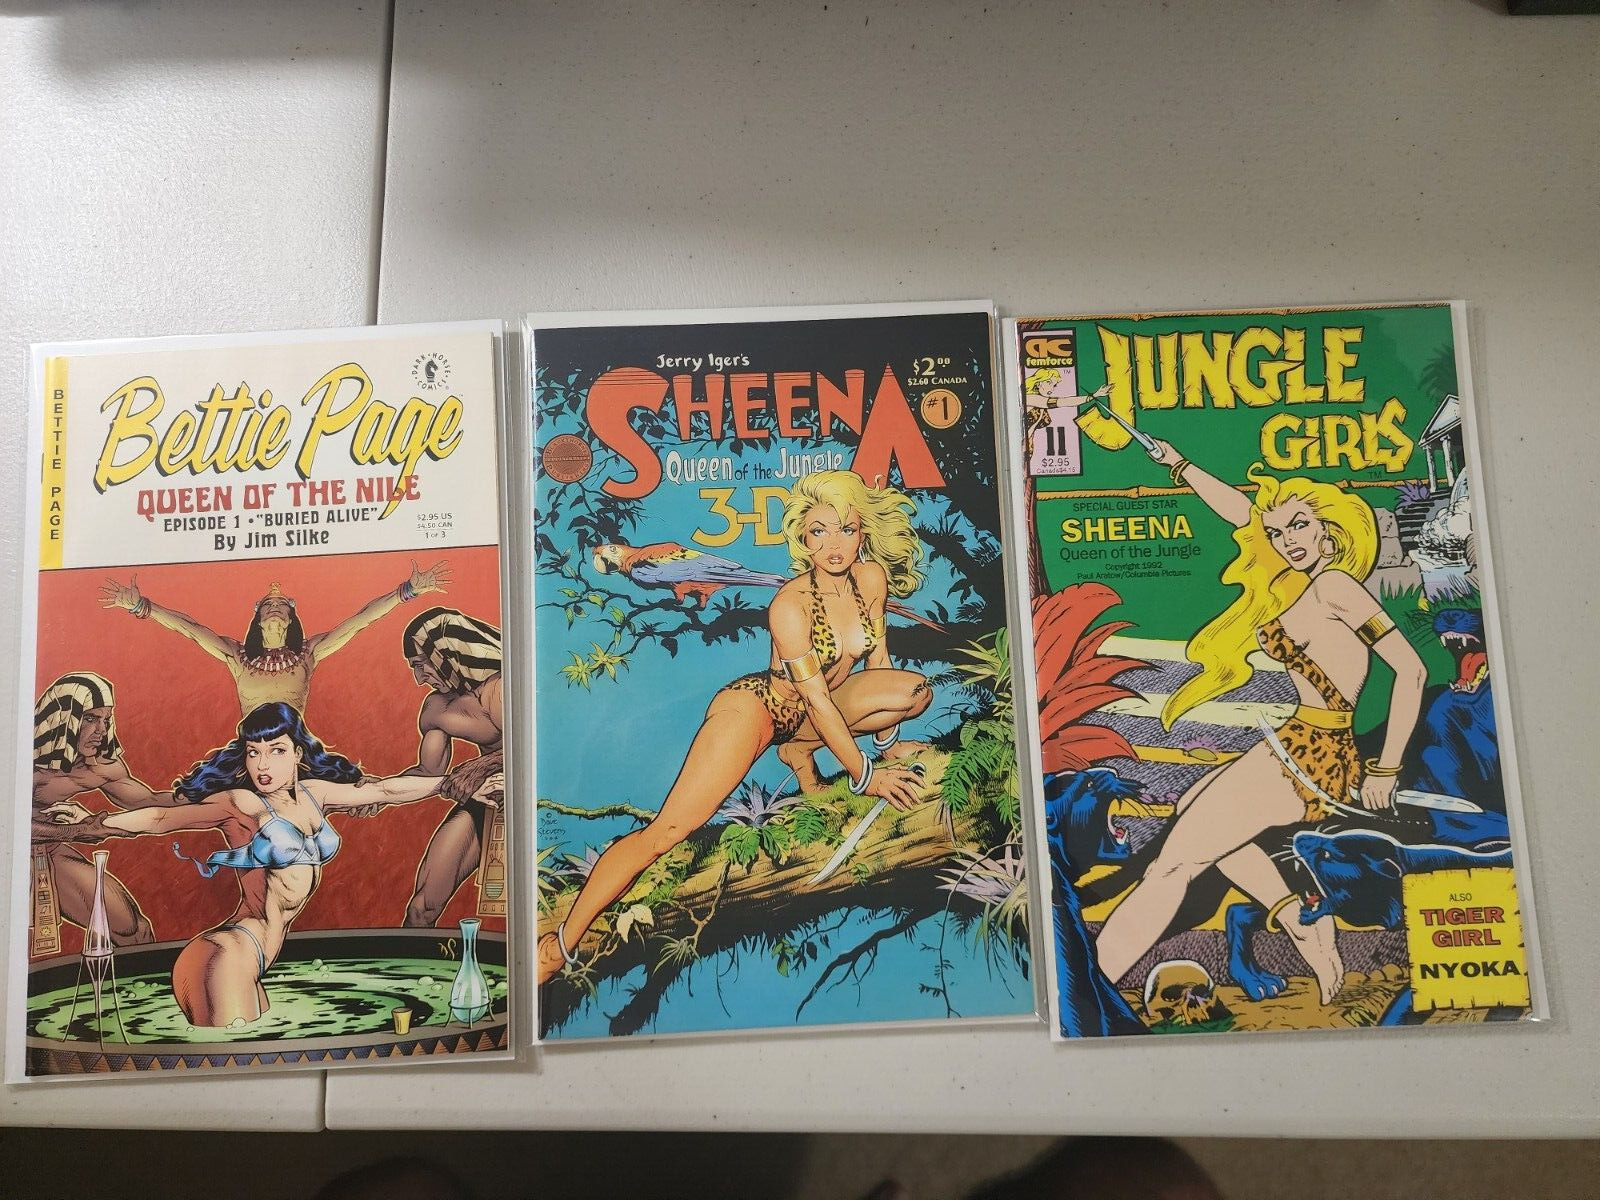 Bettie Paige Queen of the Nile #1, Sheena #1 3-D, Jungle Girls 11. Dave Stevens.